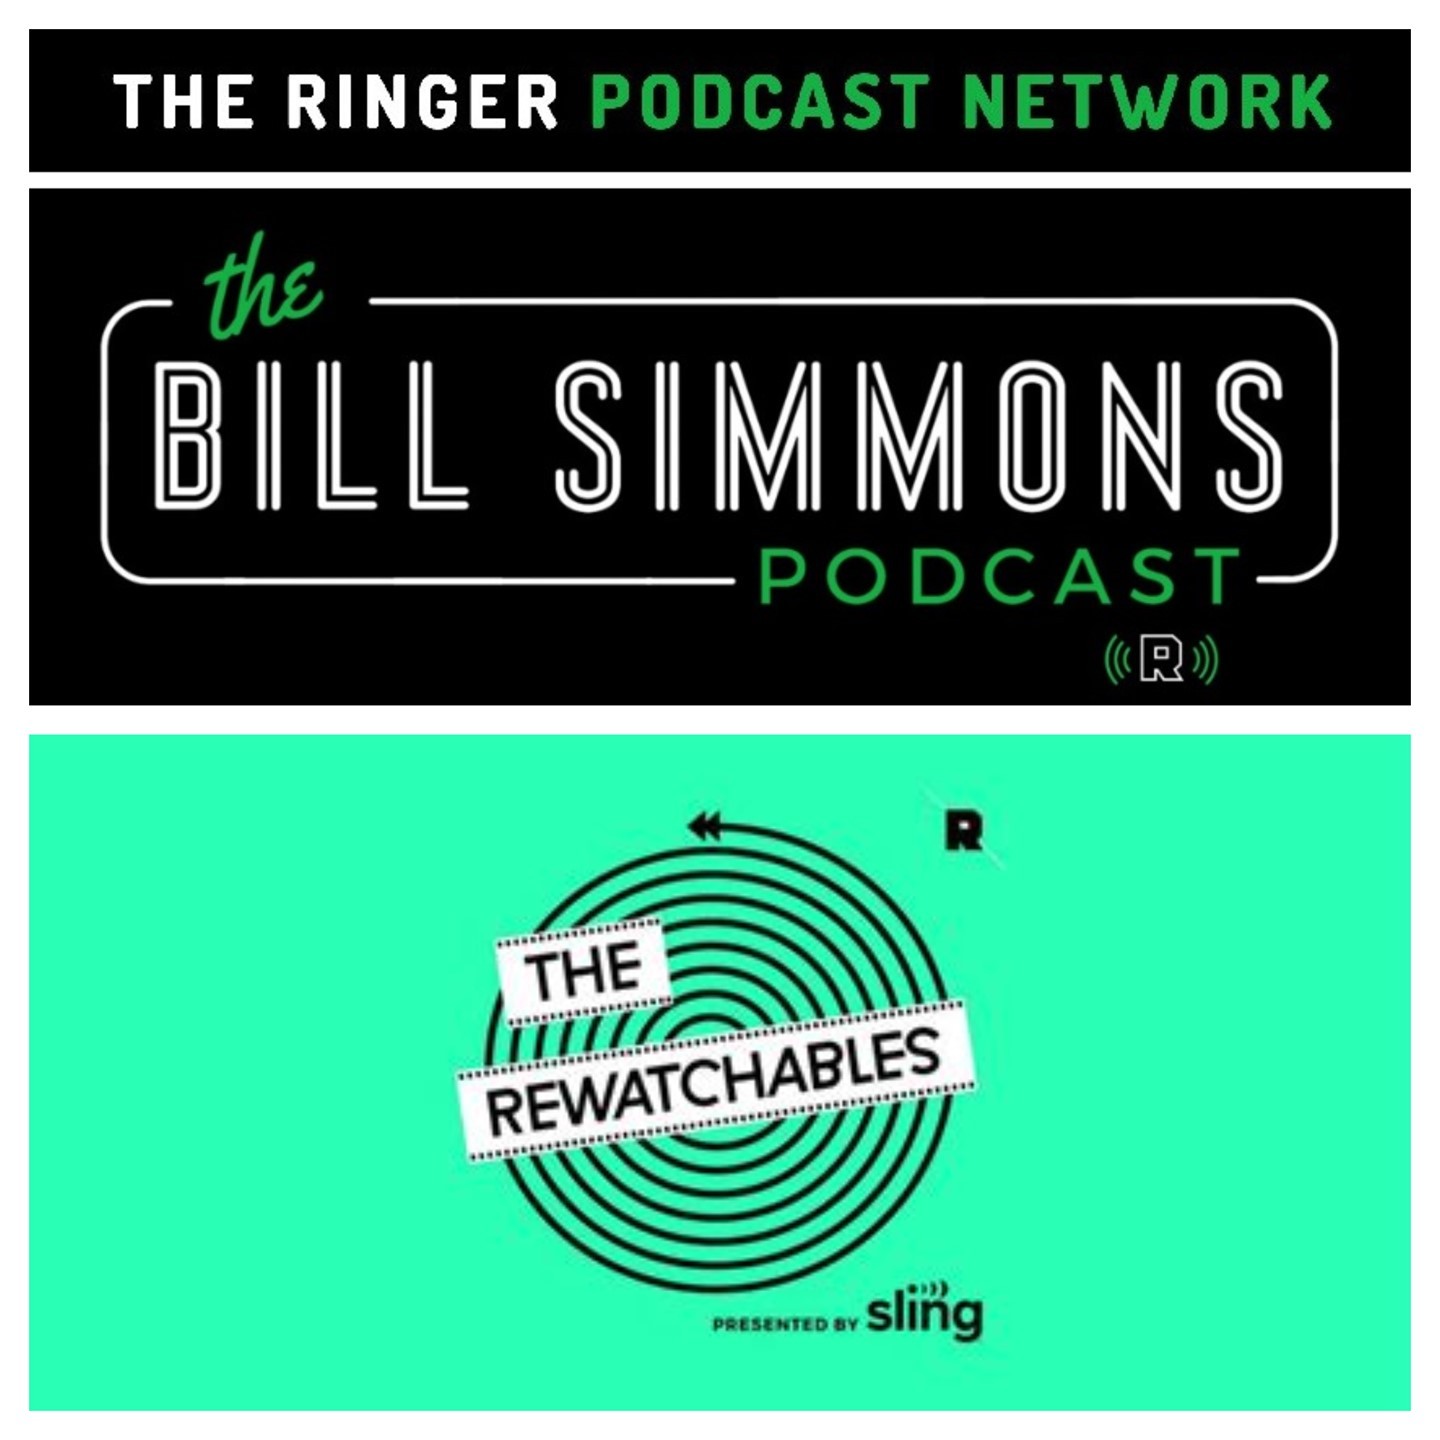 The Ringer Podcast Network’s ‘The Bill Simmons Podcast’ and ‘The Rewatchables’ film podcast